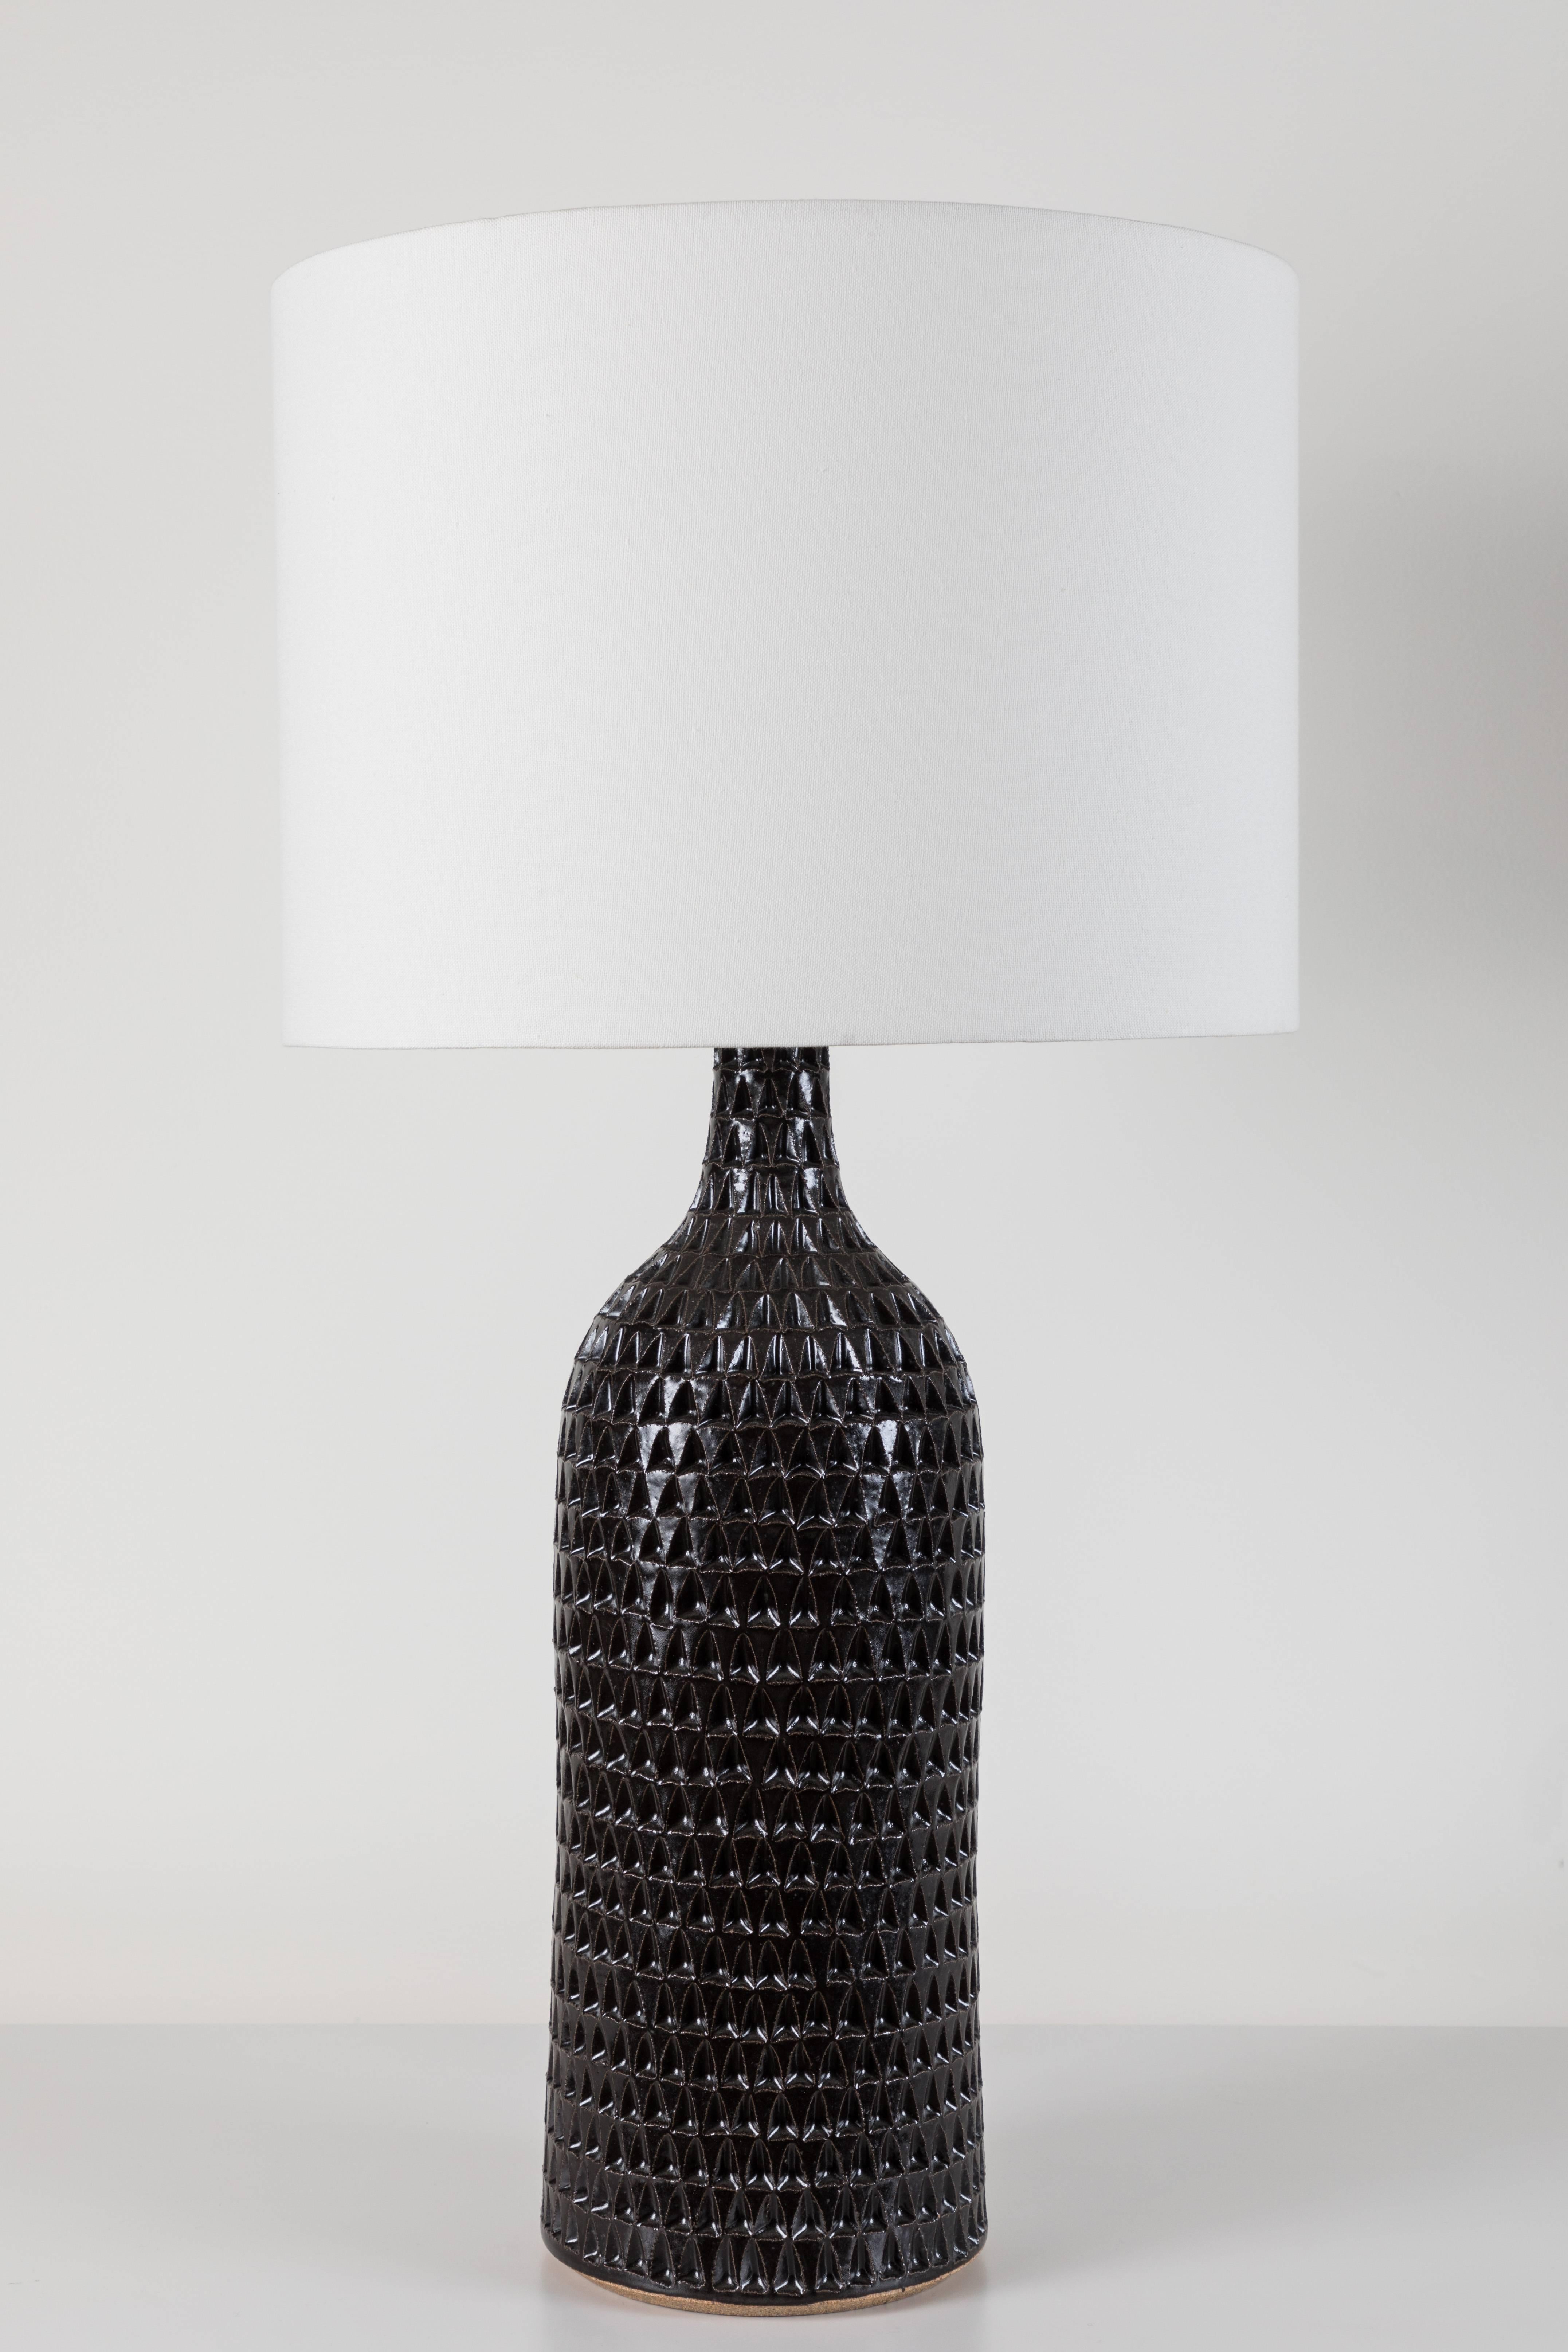 Pair of extra large black carved bottle lamps by Victoria Morris.